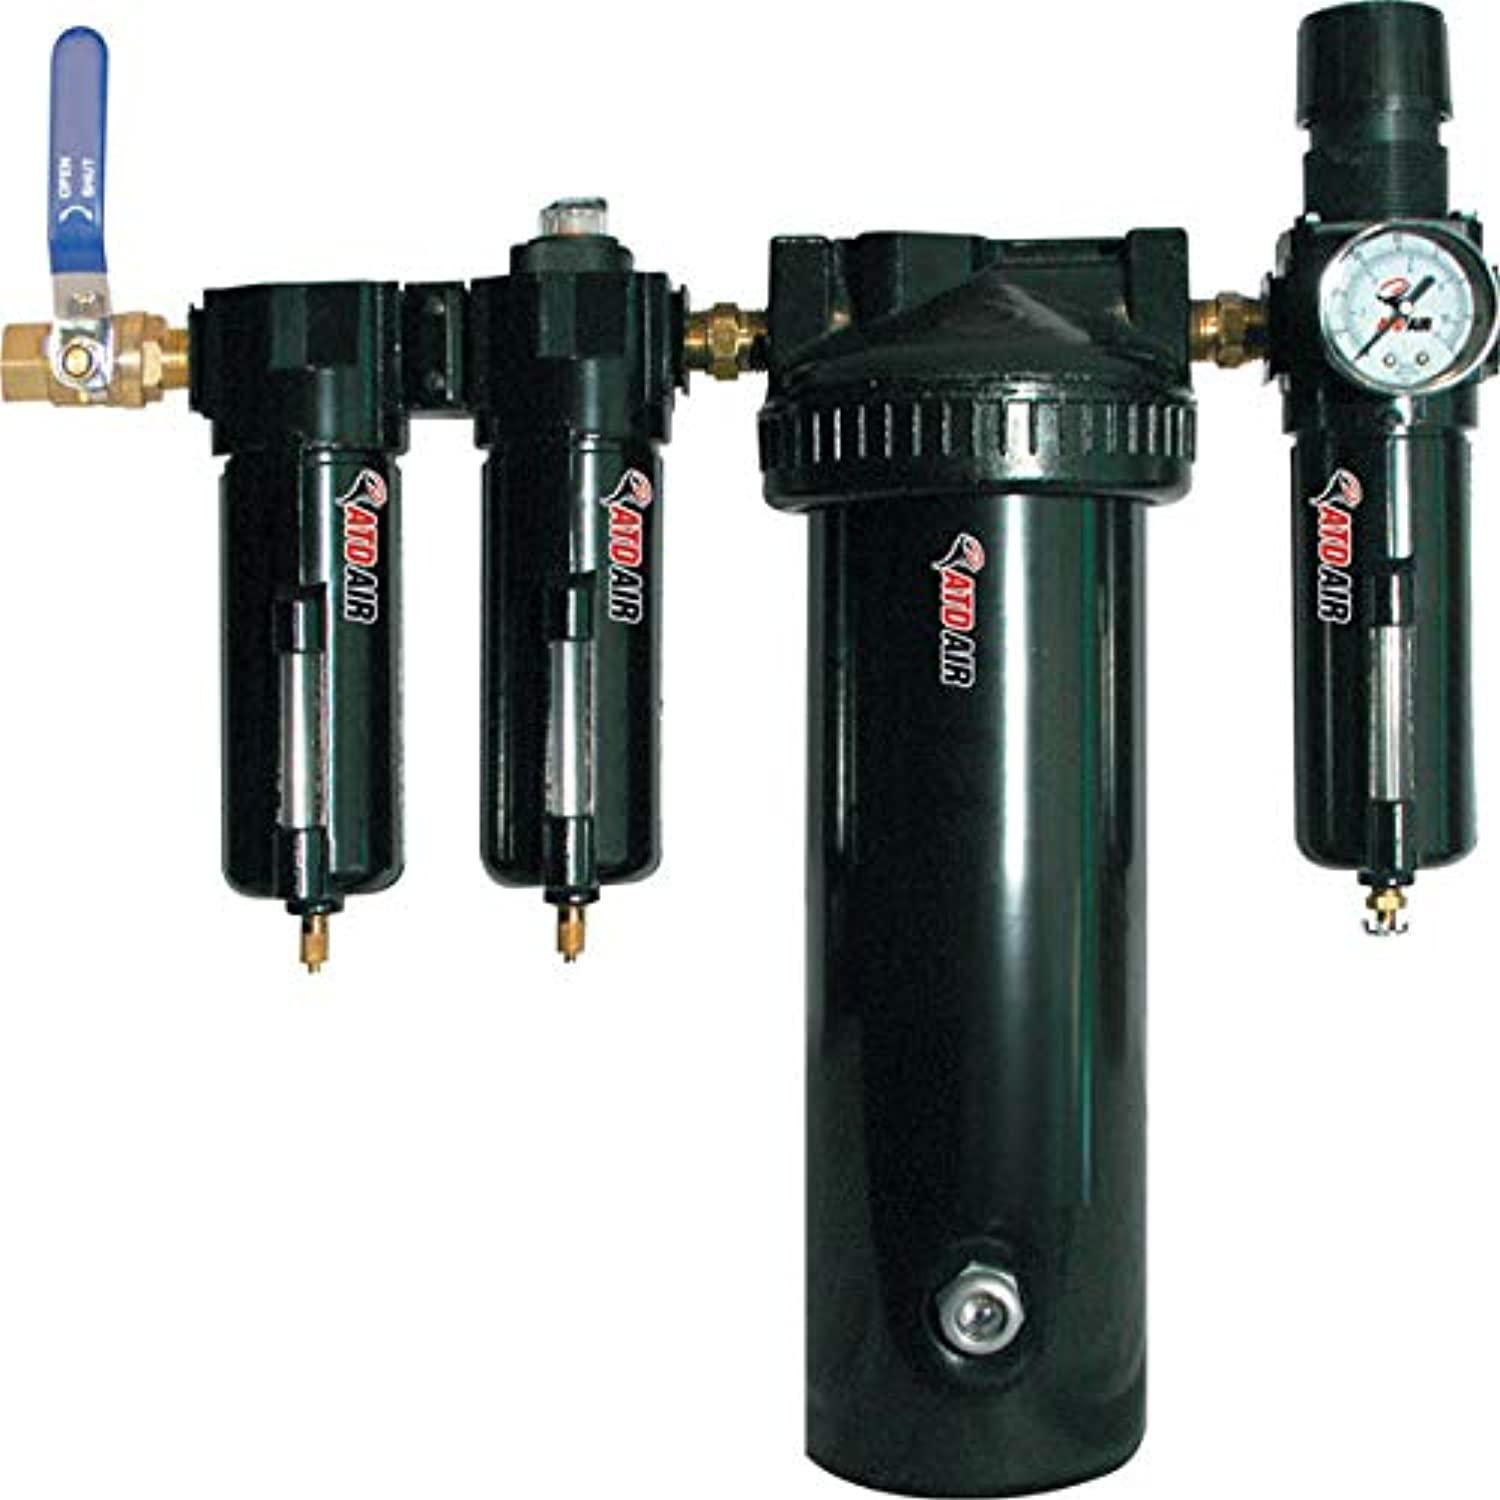 atd tools 7763 large 30-scfm desiccant air drying system with 1/2" pipe